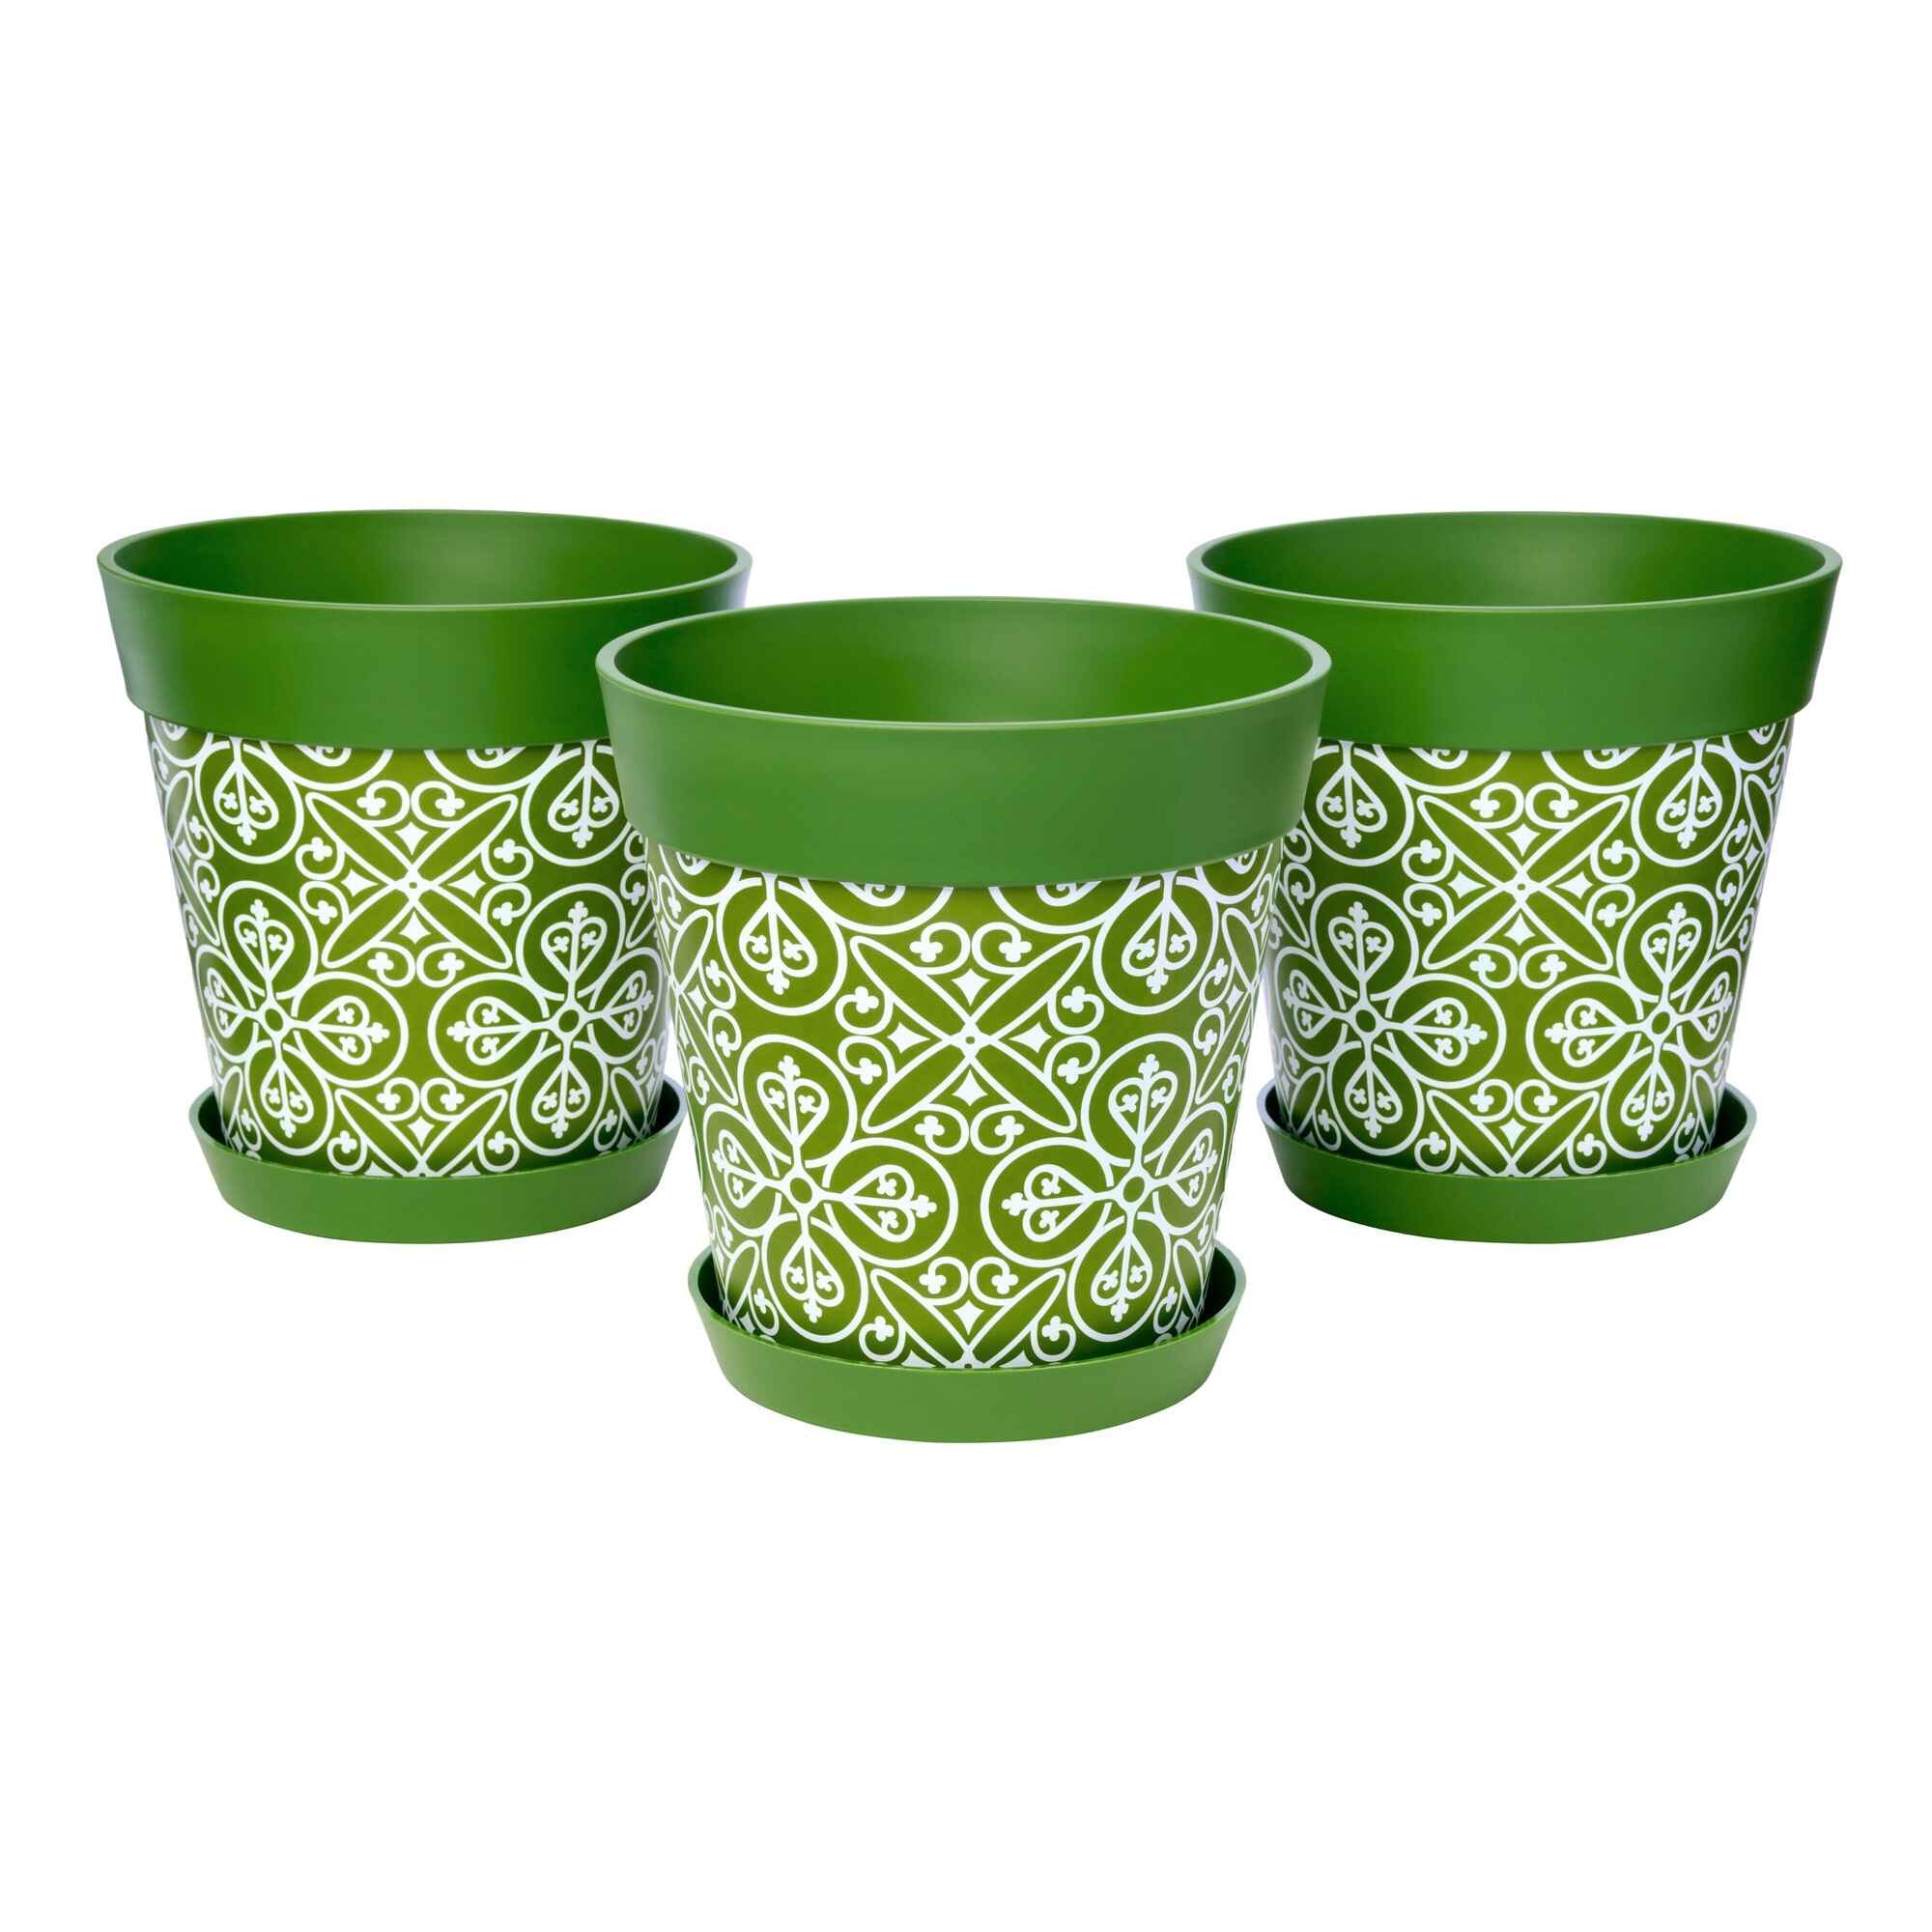 Picture of 3 Medium 22cm Green Moroccan Style Indoor/Outdoor Flower Pot and Saucers 